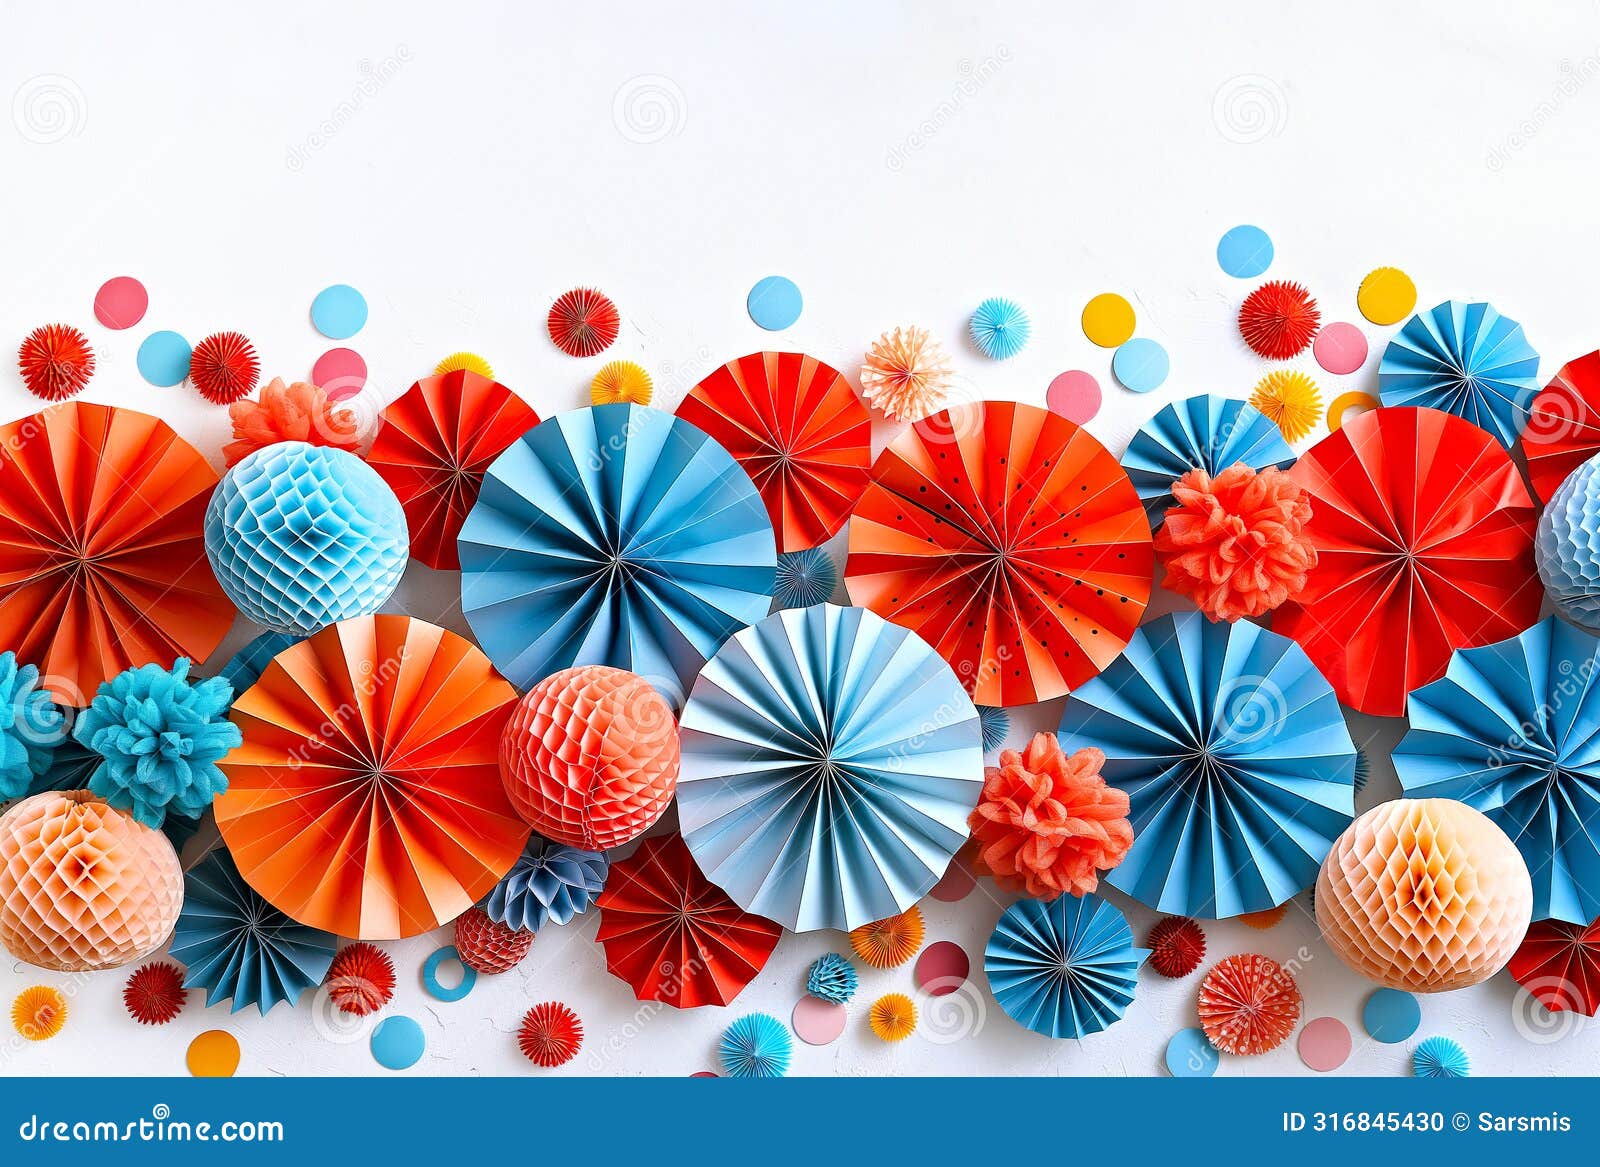 festive paper decorations array variety of s, colors and textures on a light background. home diy decor for patriotic holiday